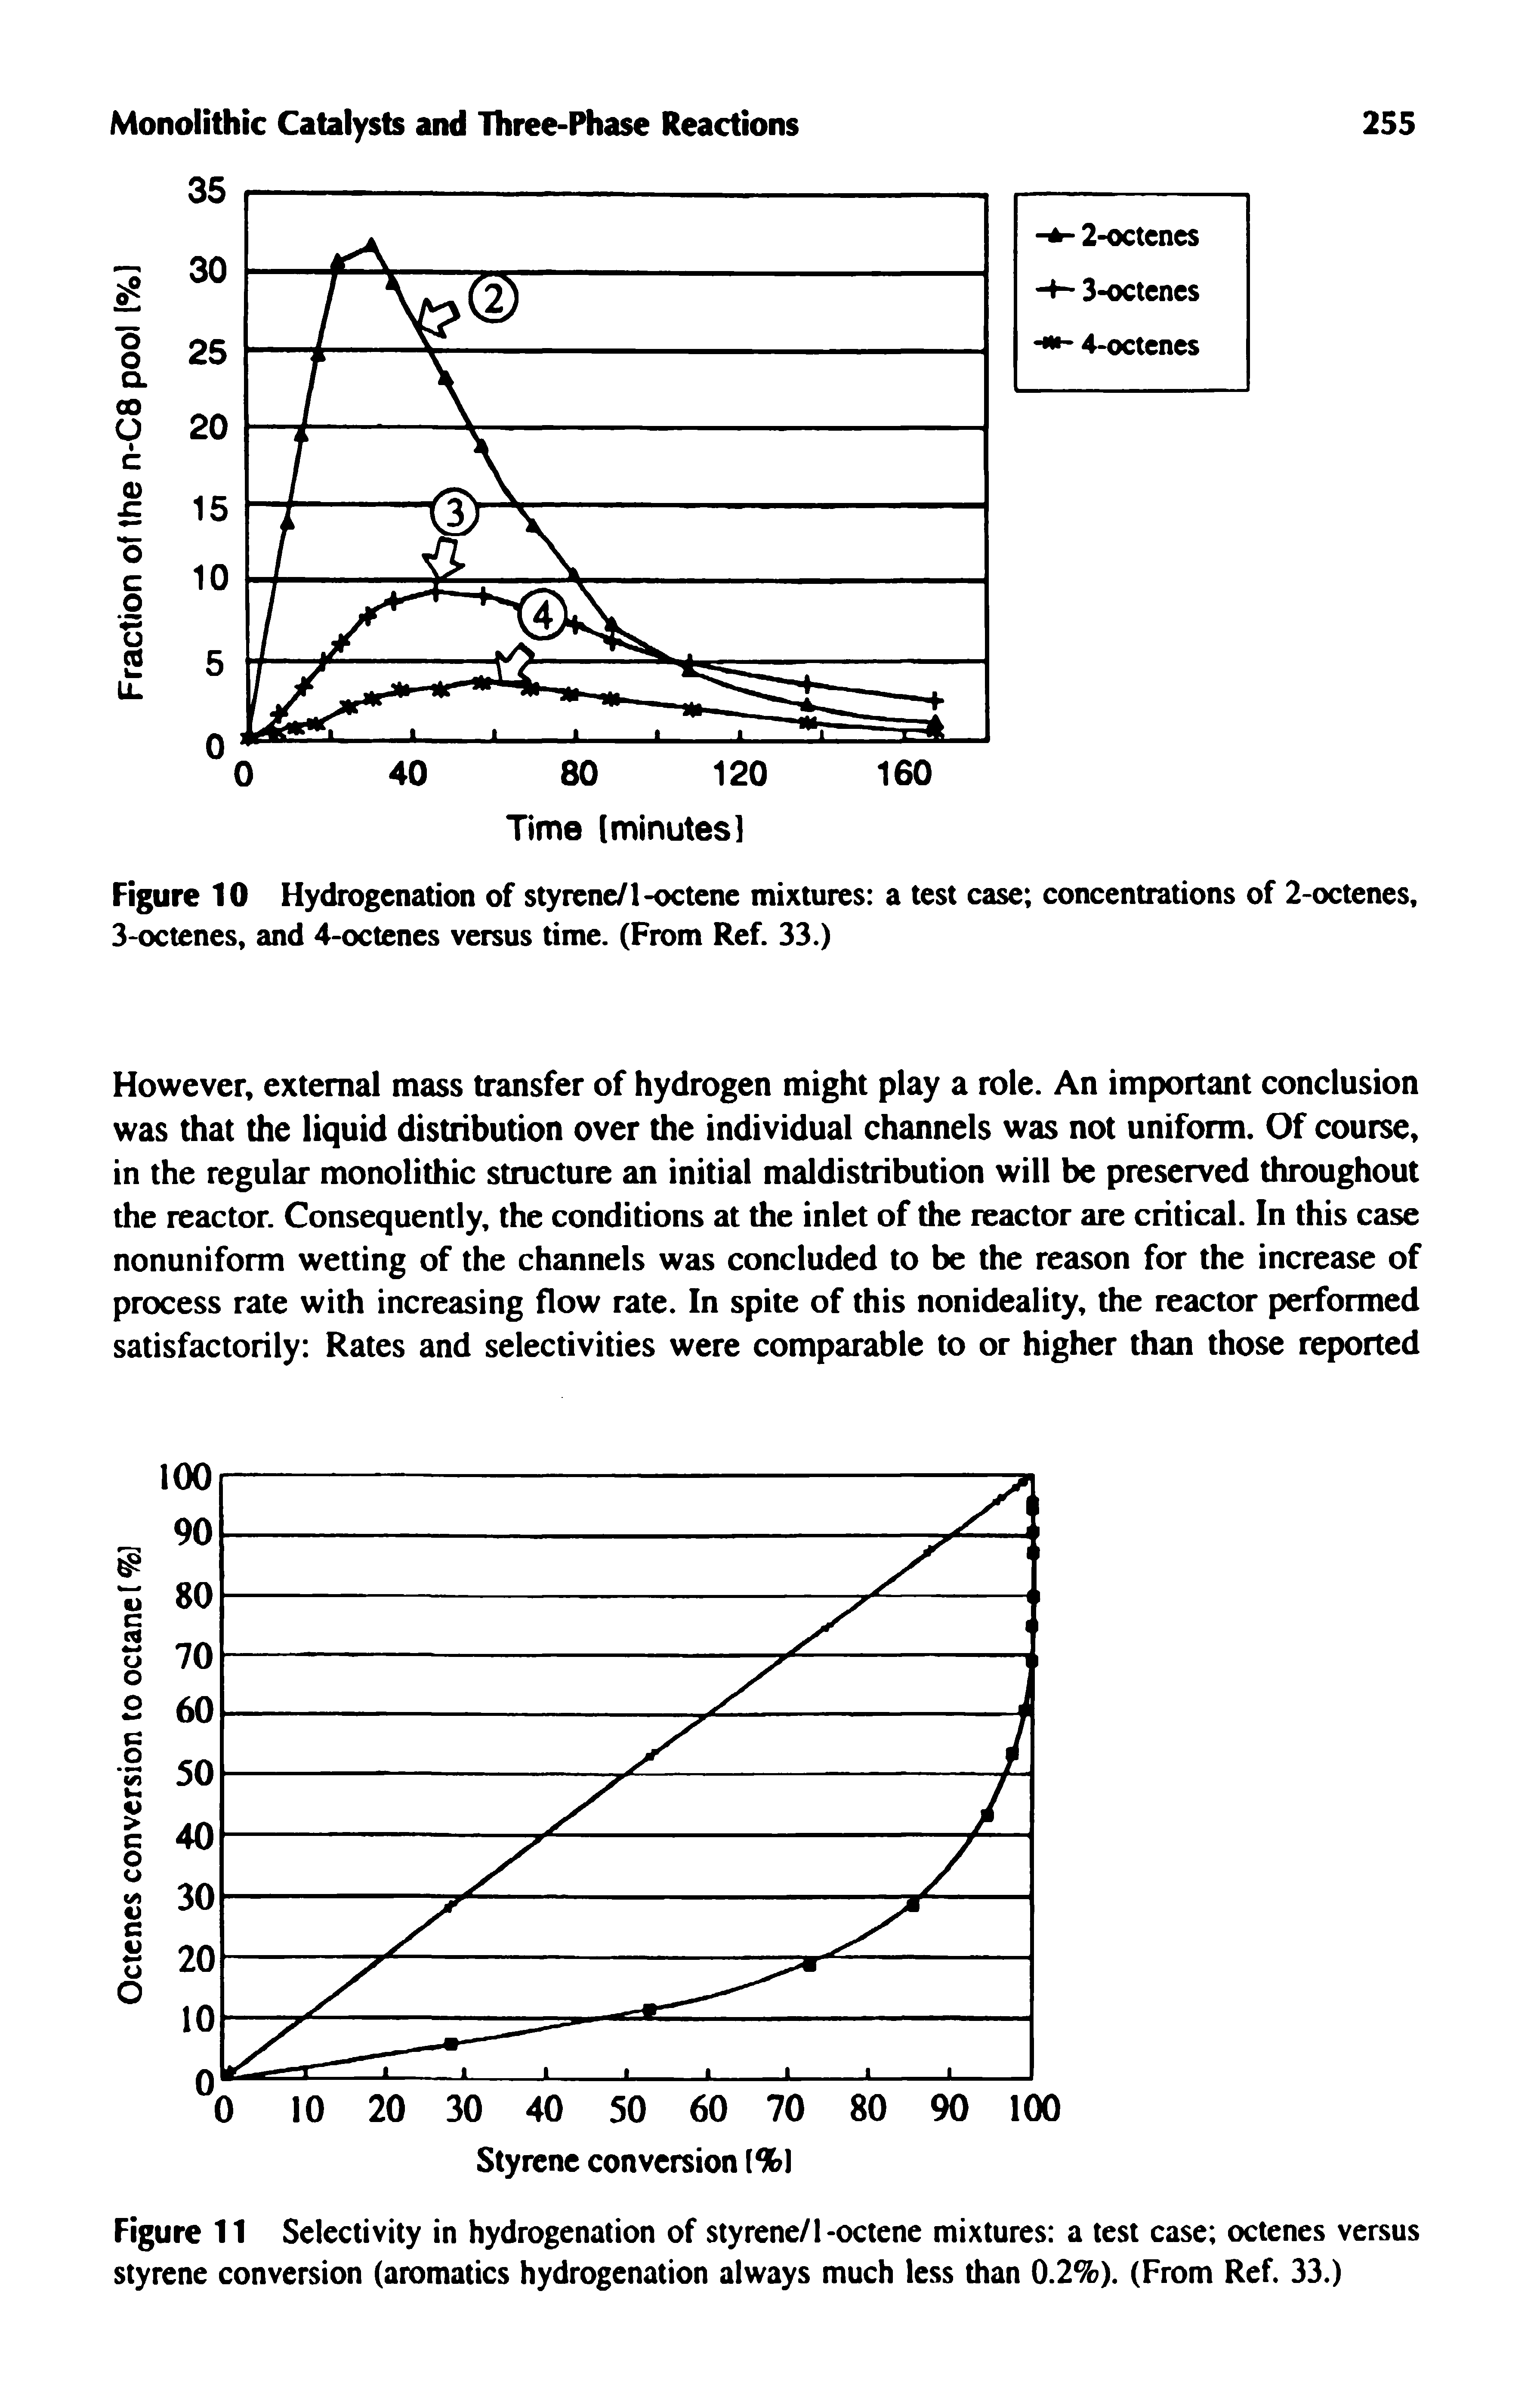 Figure 11 Selectivity in hydrogenation of styrene/l-octene mixtures a test case octenes versus styrene conversion (aromatics hydrogenation always much less than 0.2%). (From Ref. 33.)...